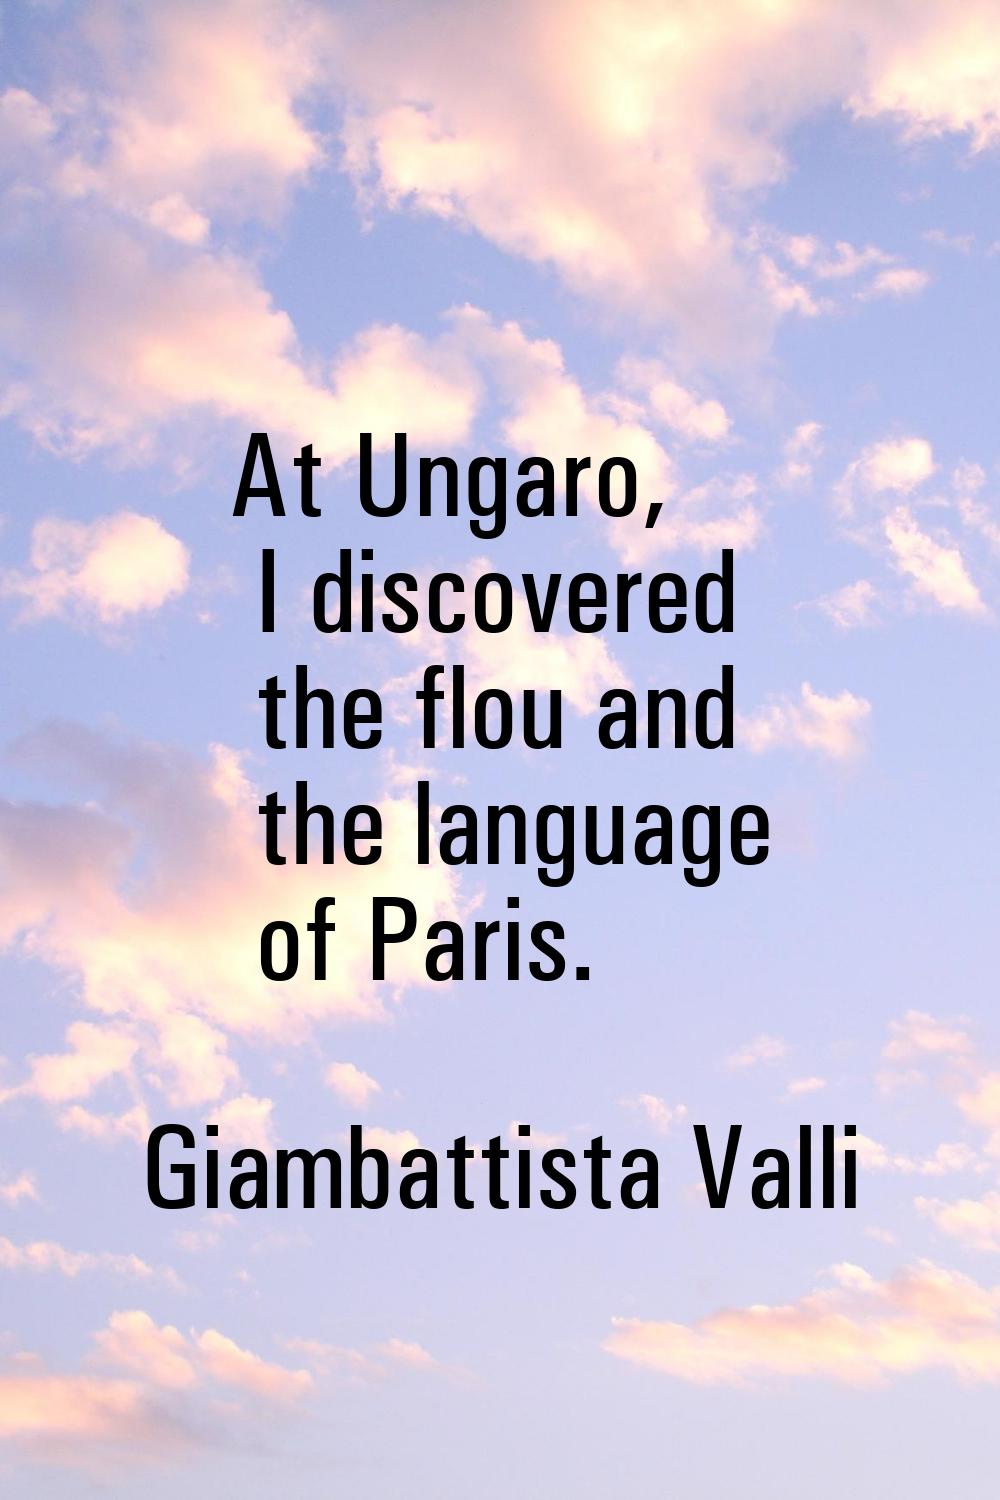 At Ungaro, I discovered the flou and the language of Paris.